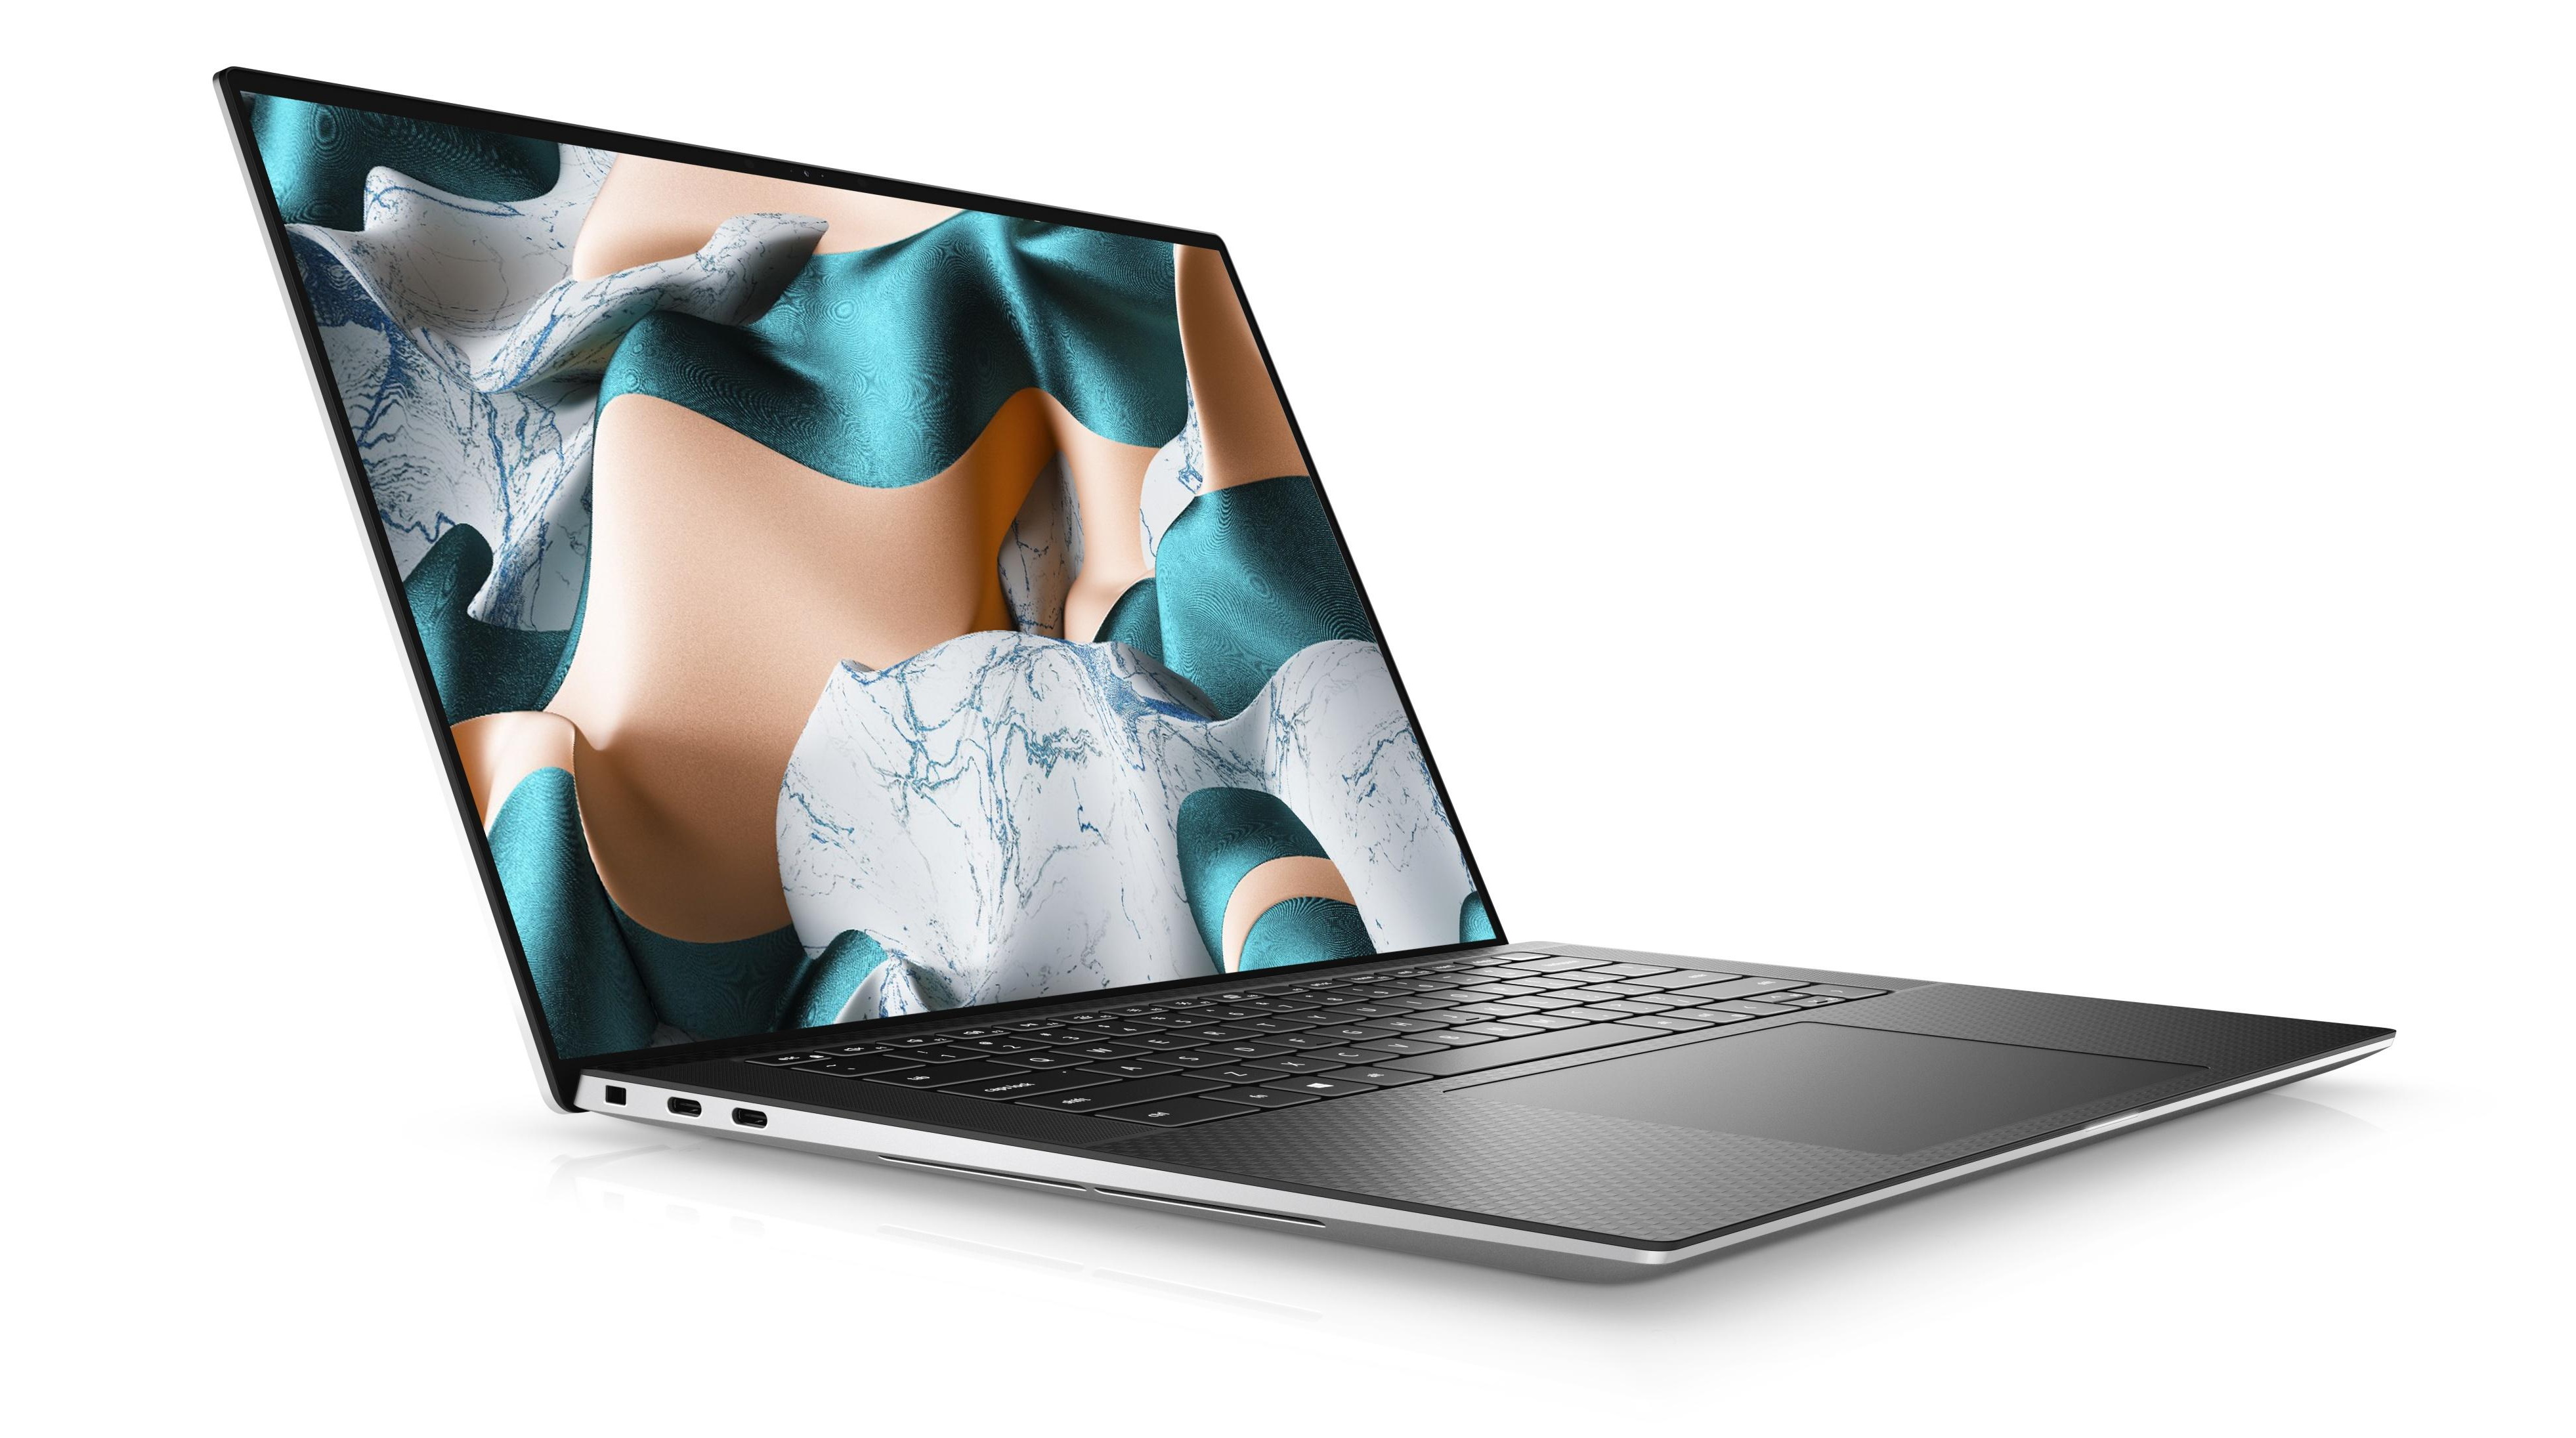 Dell XPS 15 at an angle on a white background